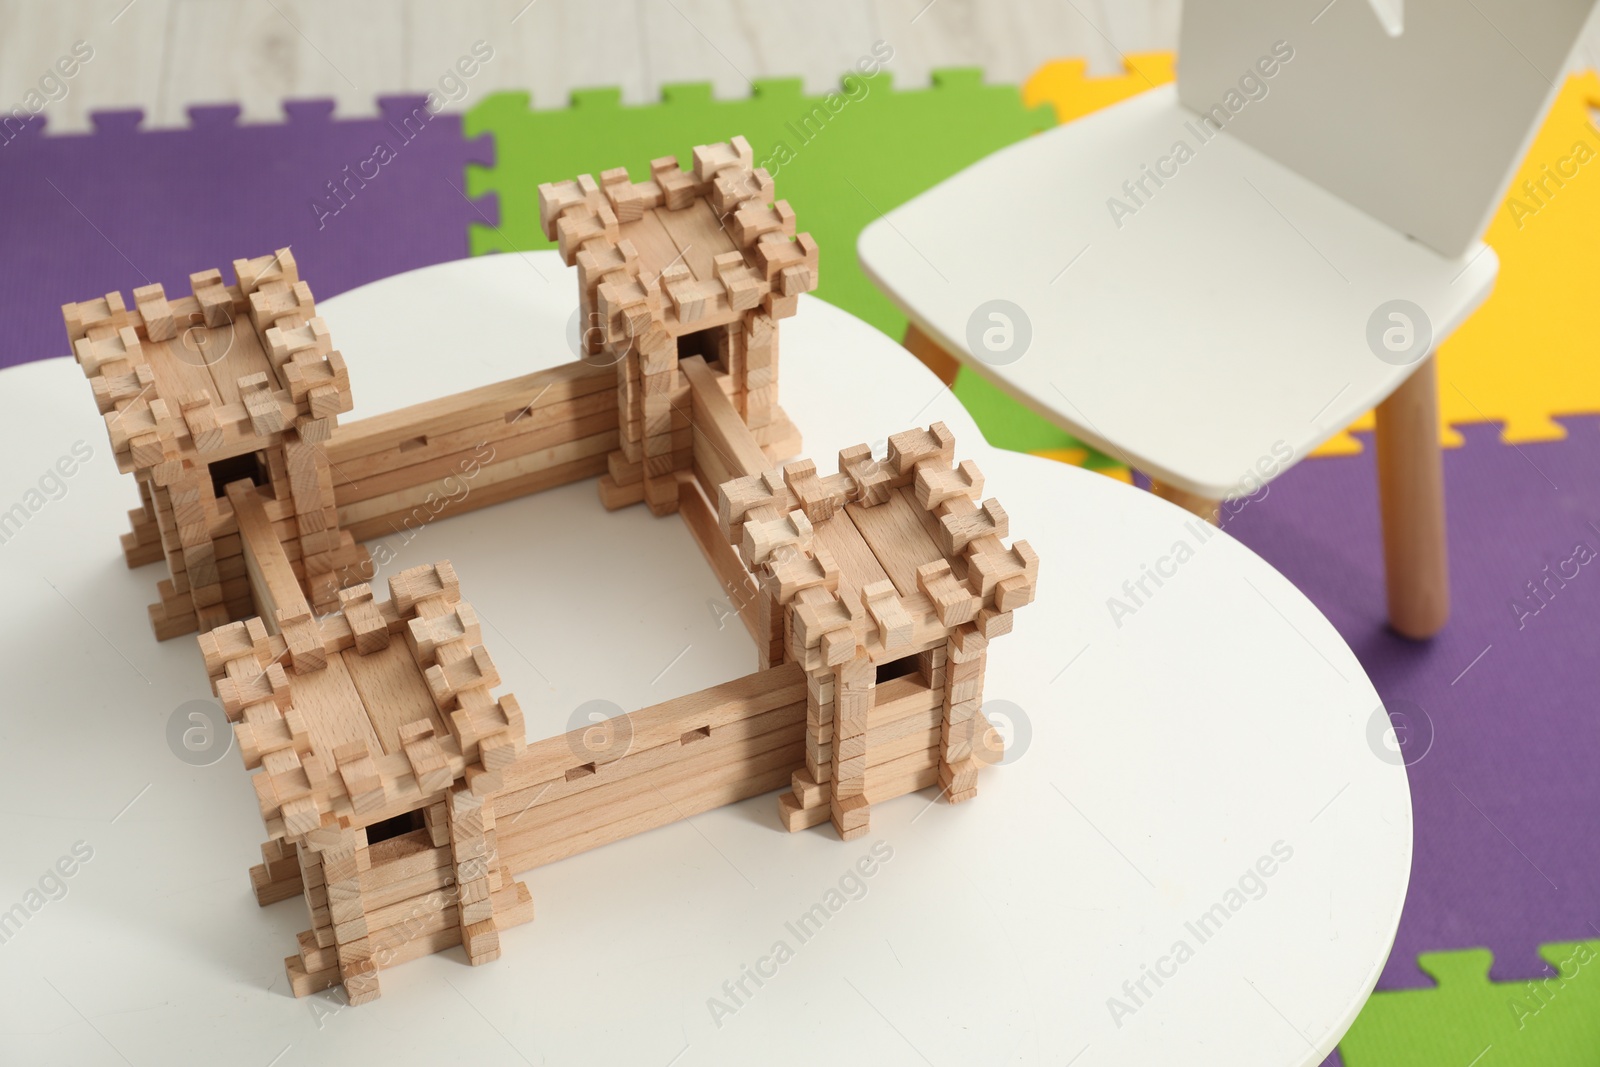 Photo of Wooden fortress on white table indoors. Children's toy